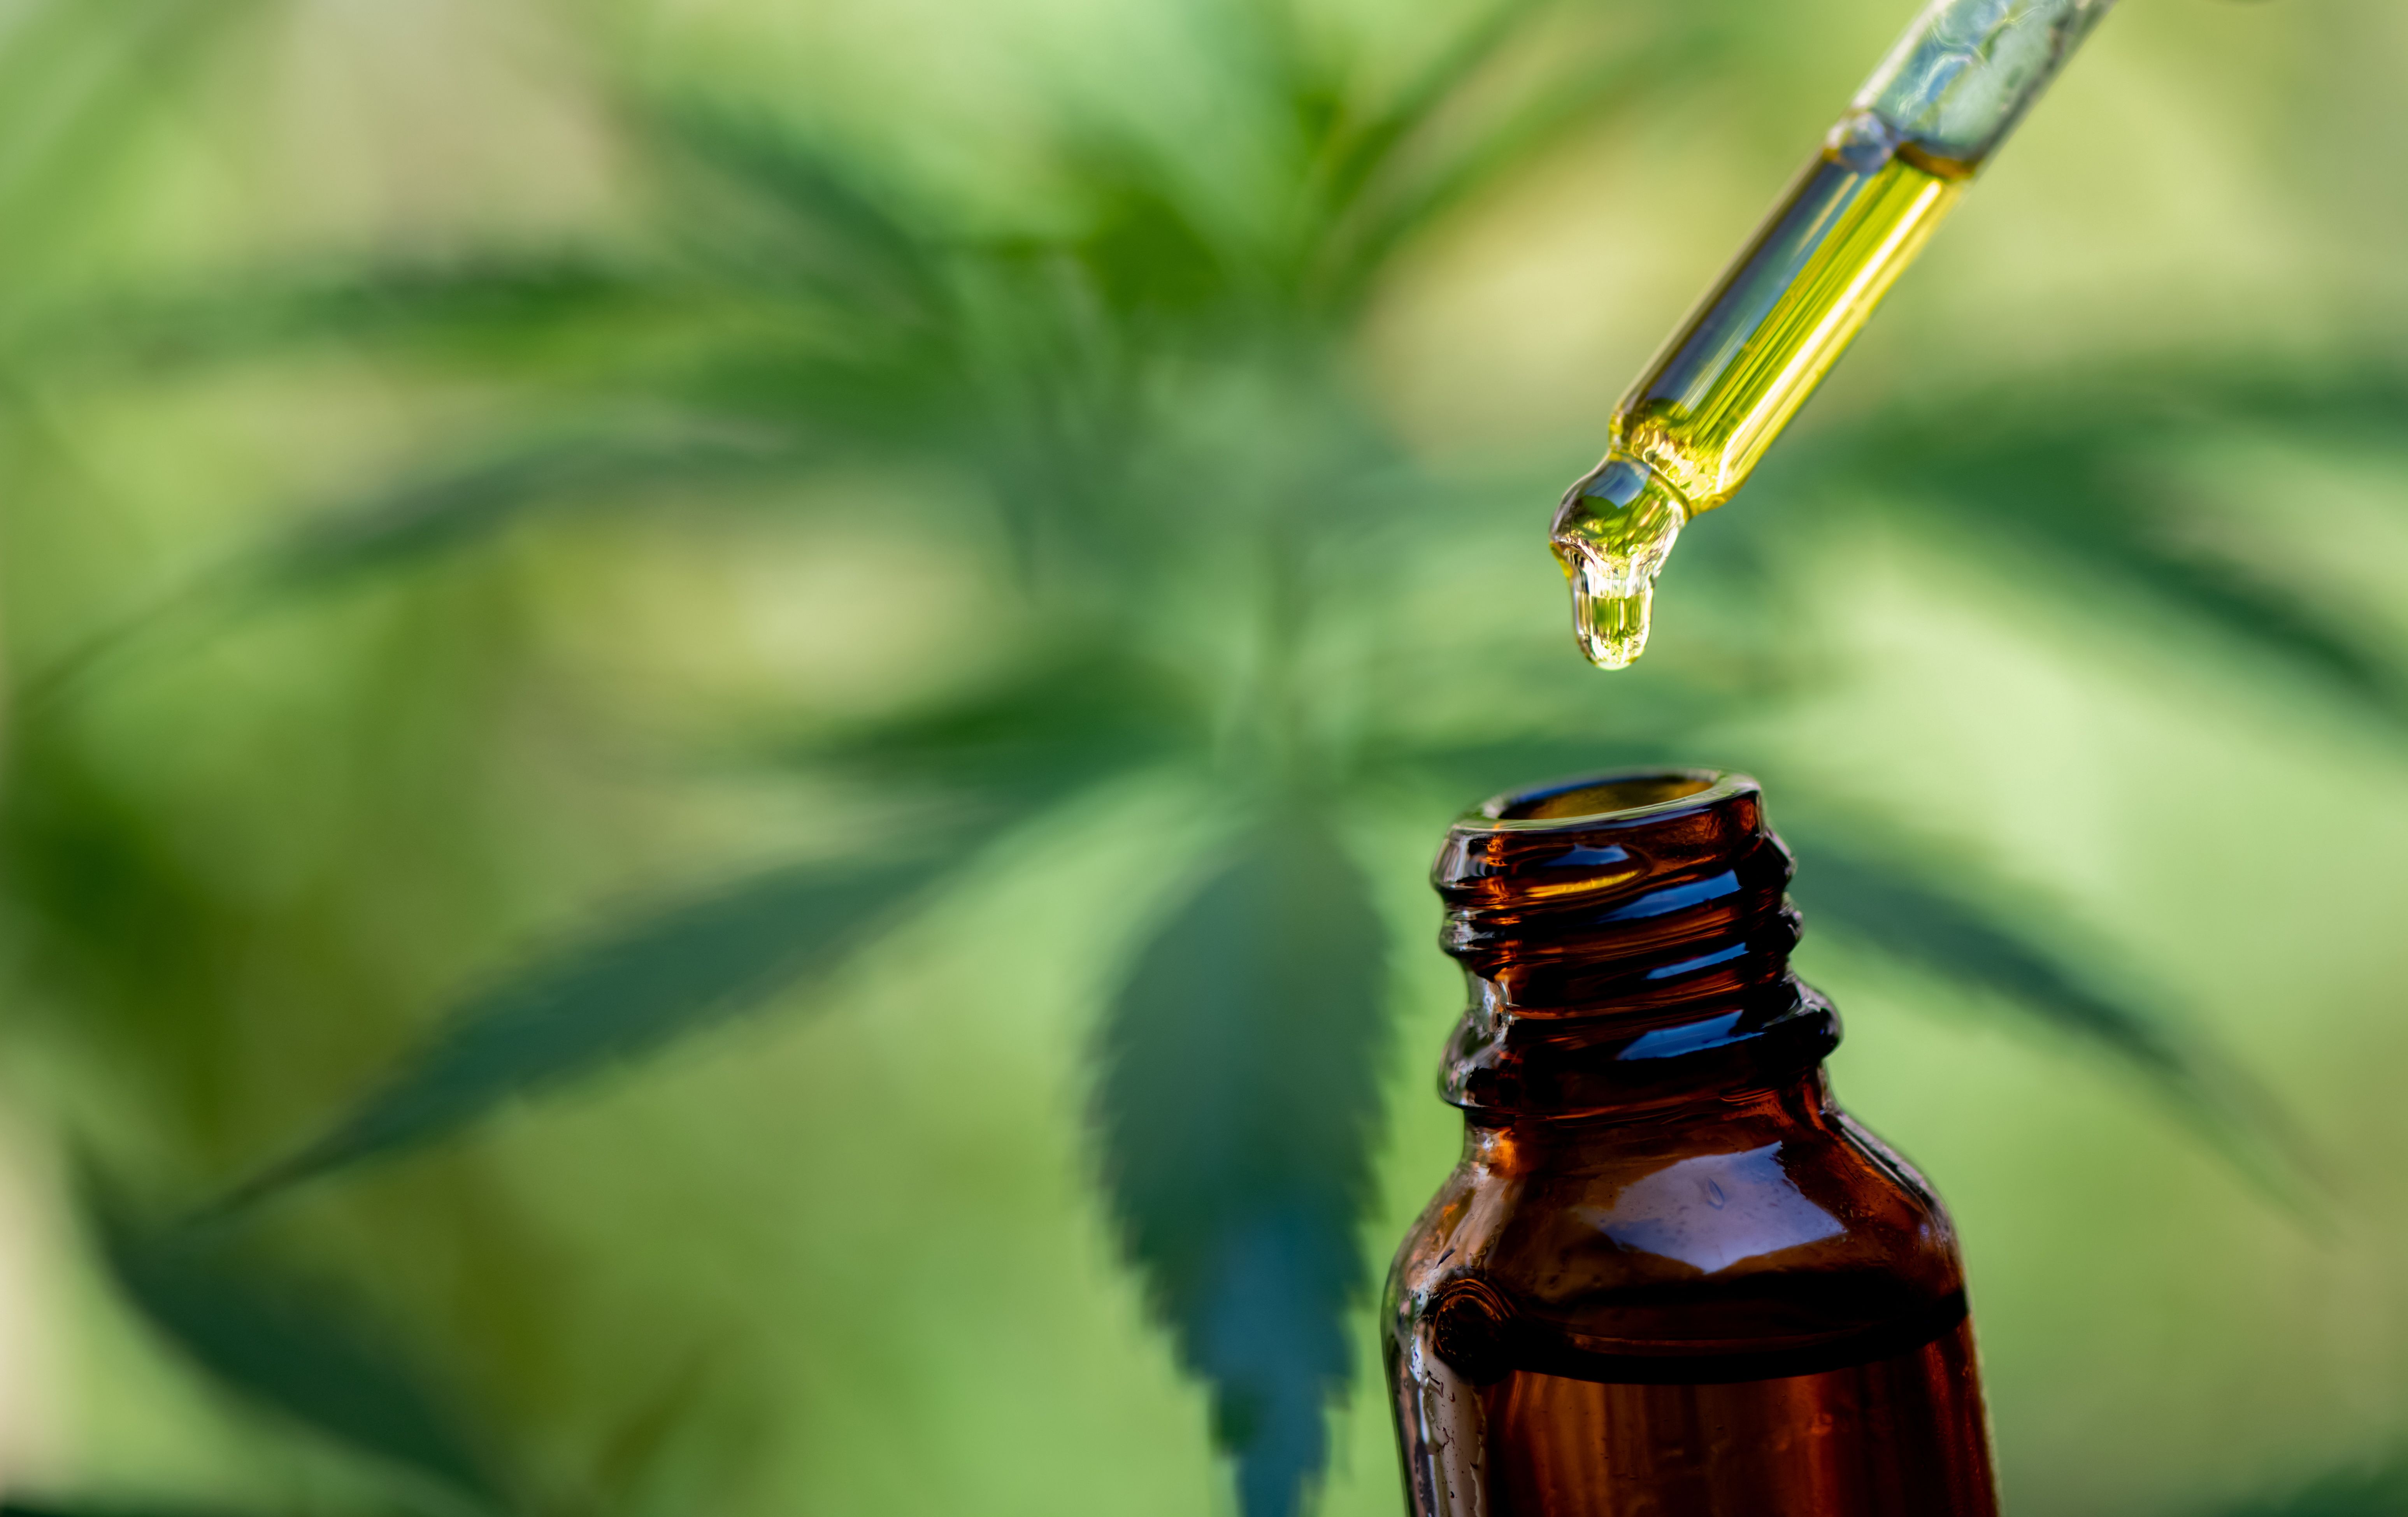 CBD/THC Show Promise in MS, but More Research Is Needed